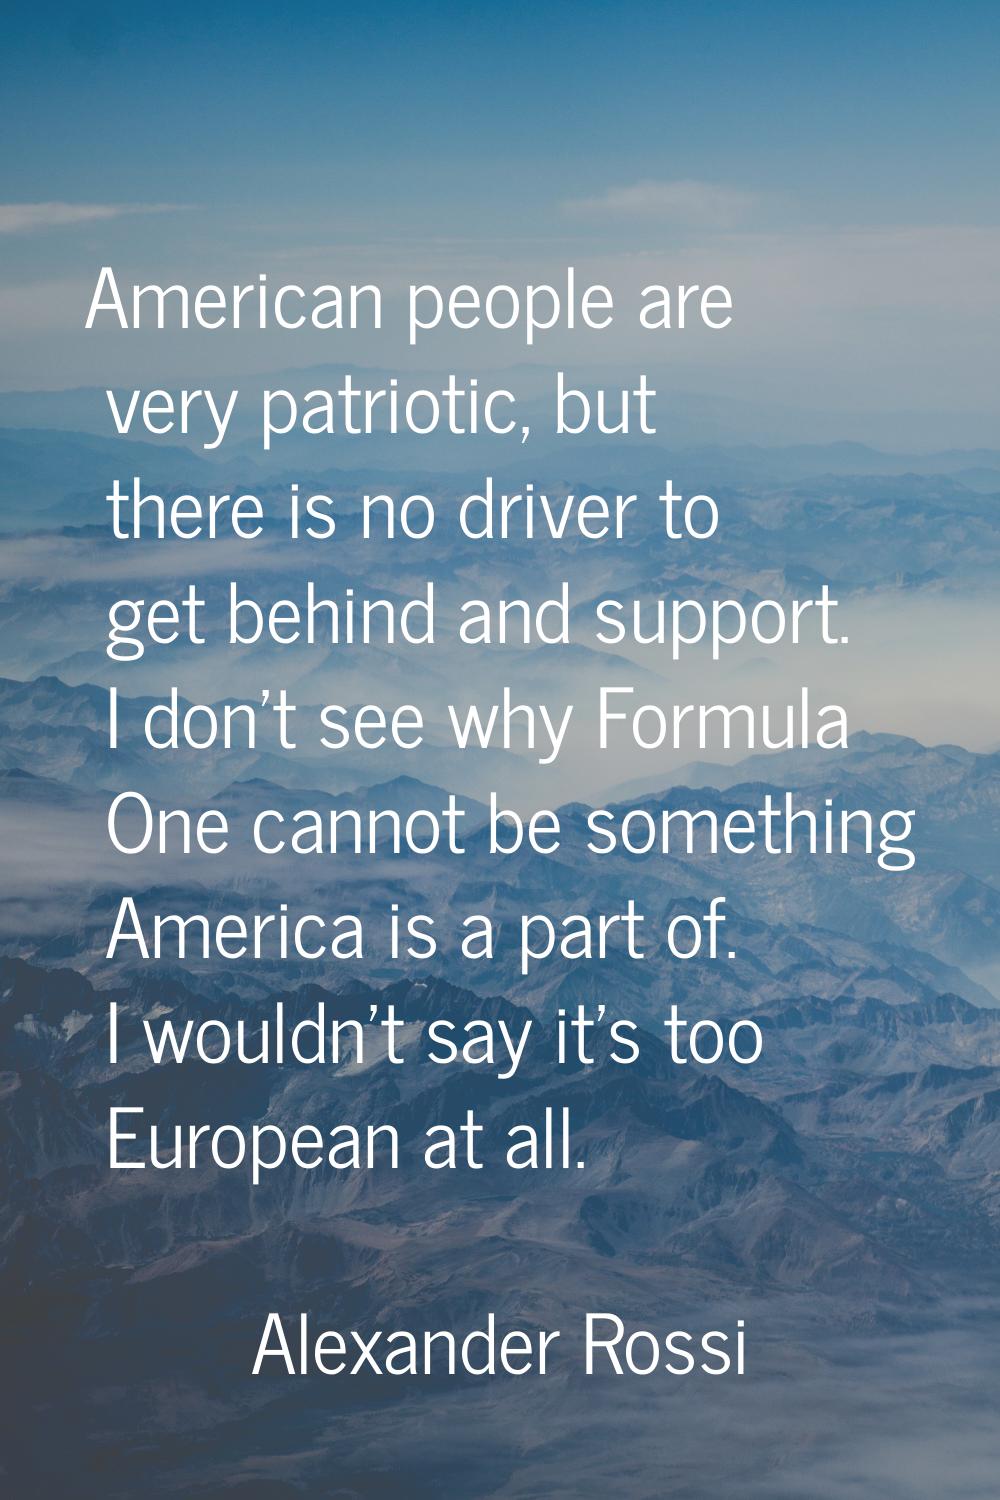 American people are very patriotic, but there is no driver to get behind and support. I don't see w